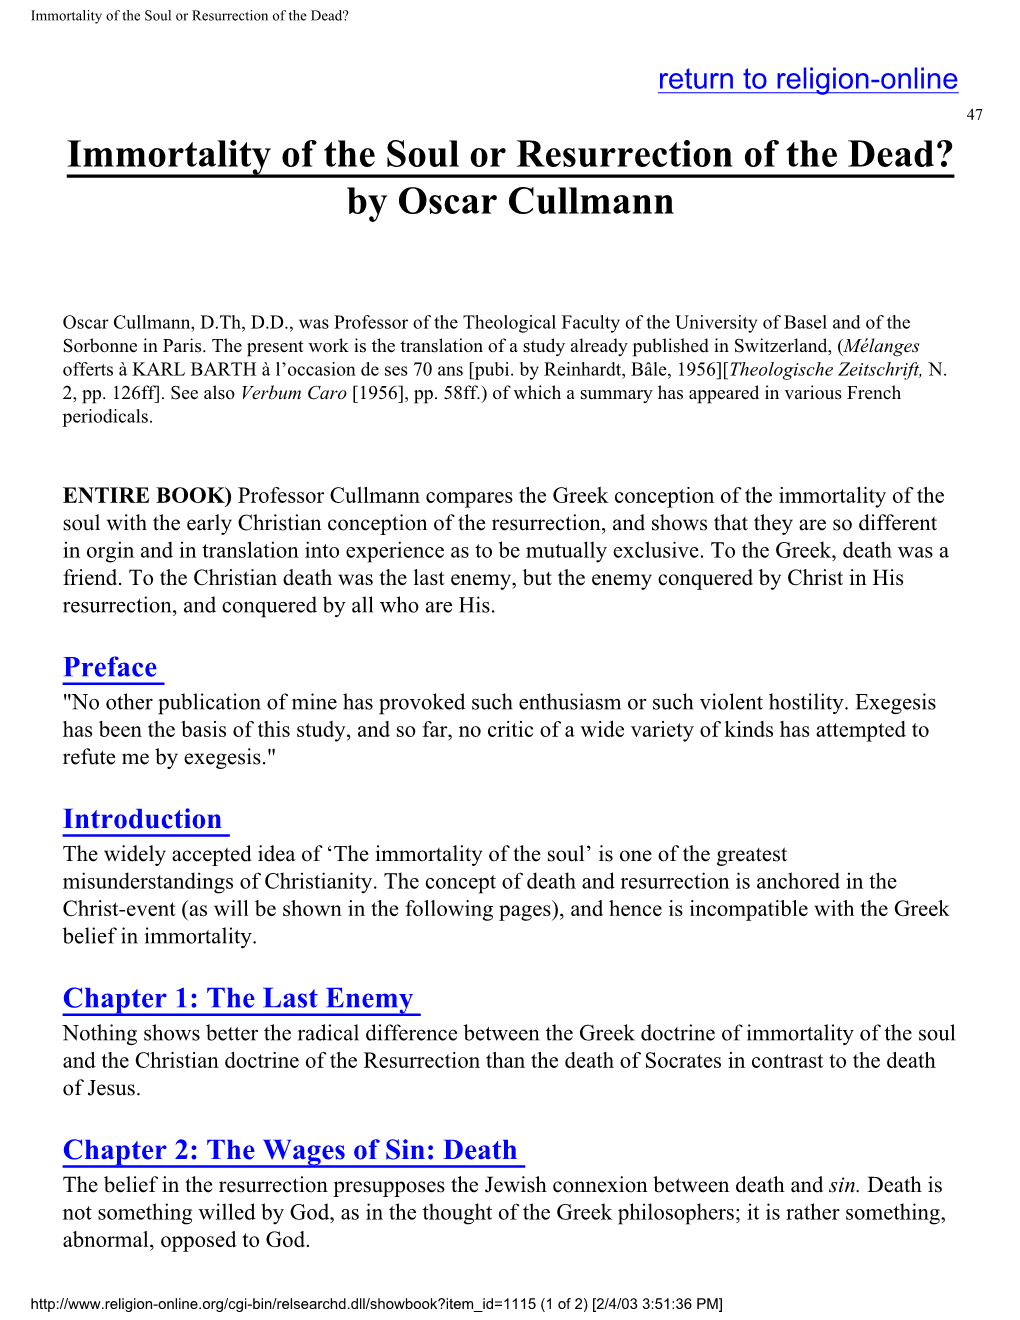 Immortality of the Soul Or Resurrection of the Dead? by Oscar Cullmann